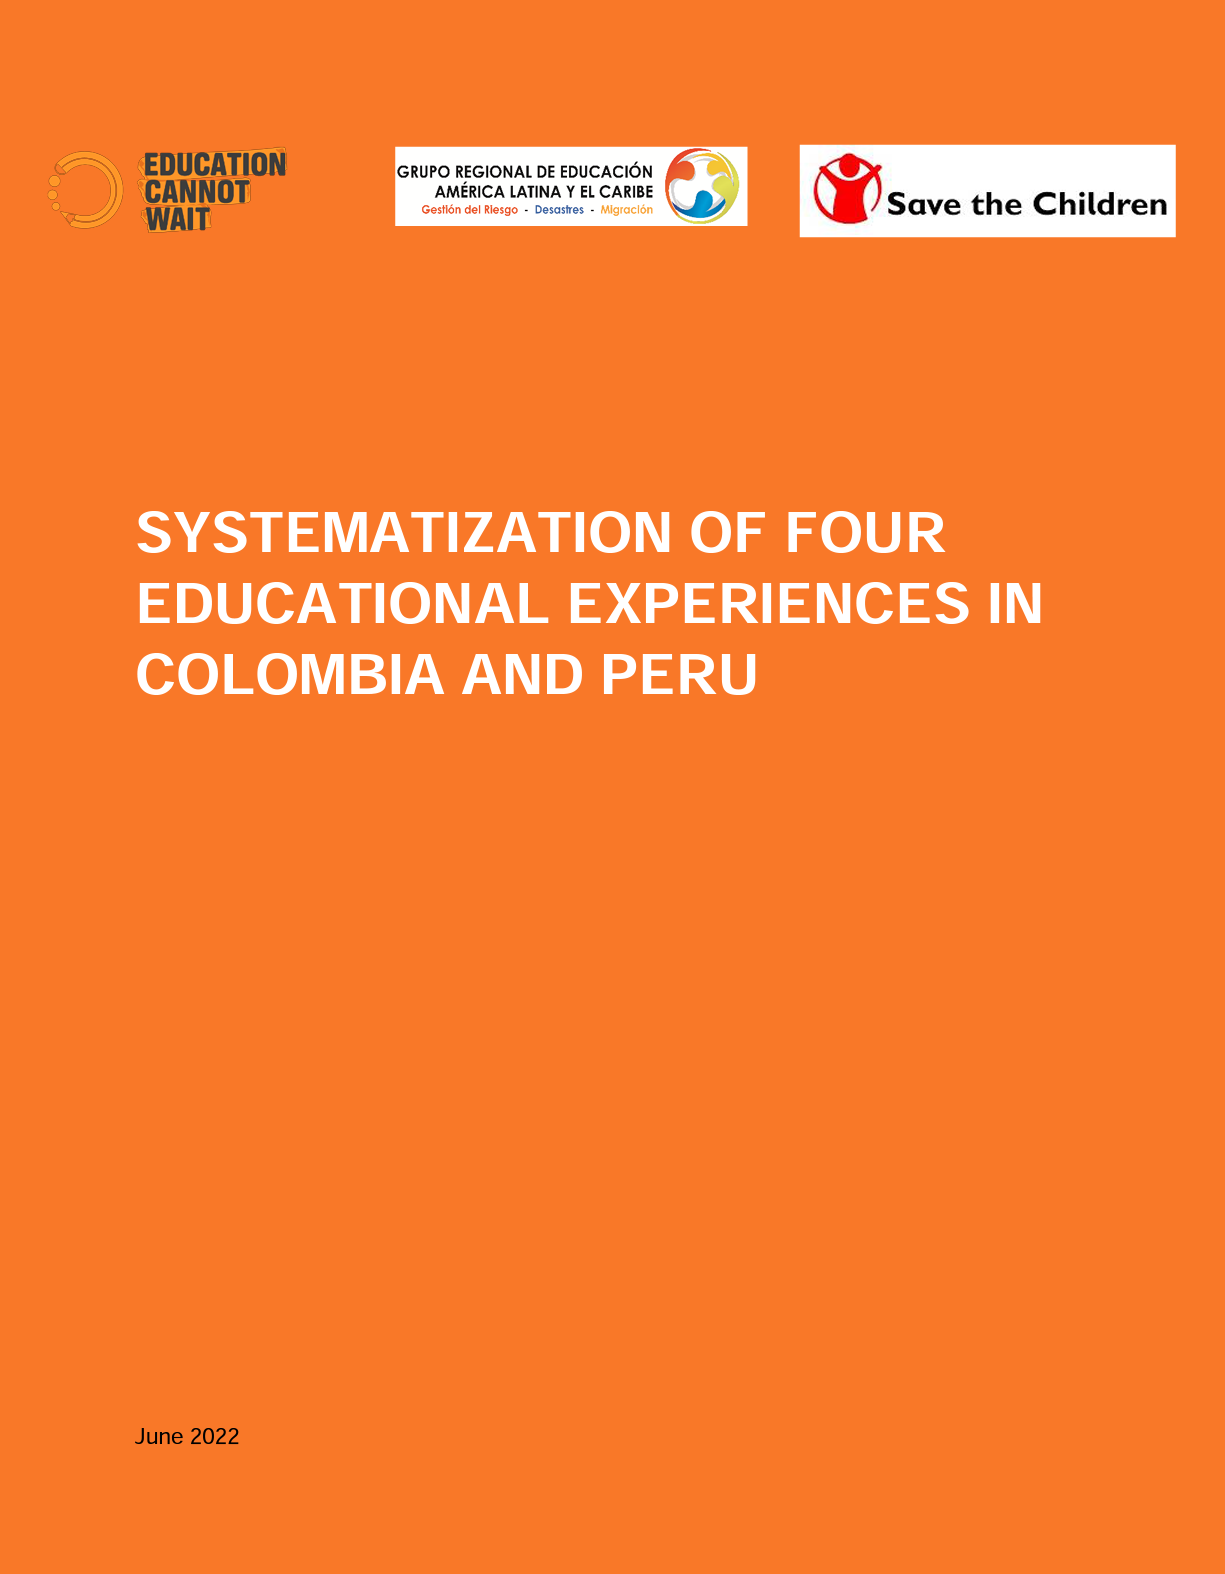 Systematization of Four Educational Experiences in Colombia and Peru